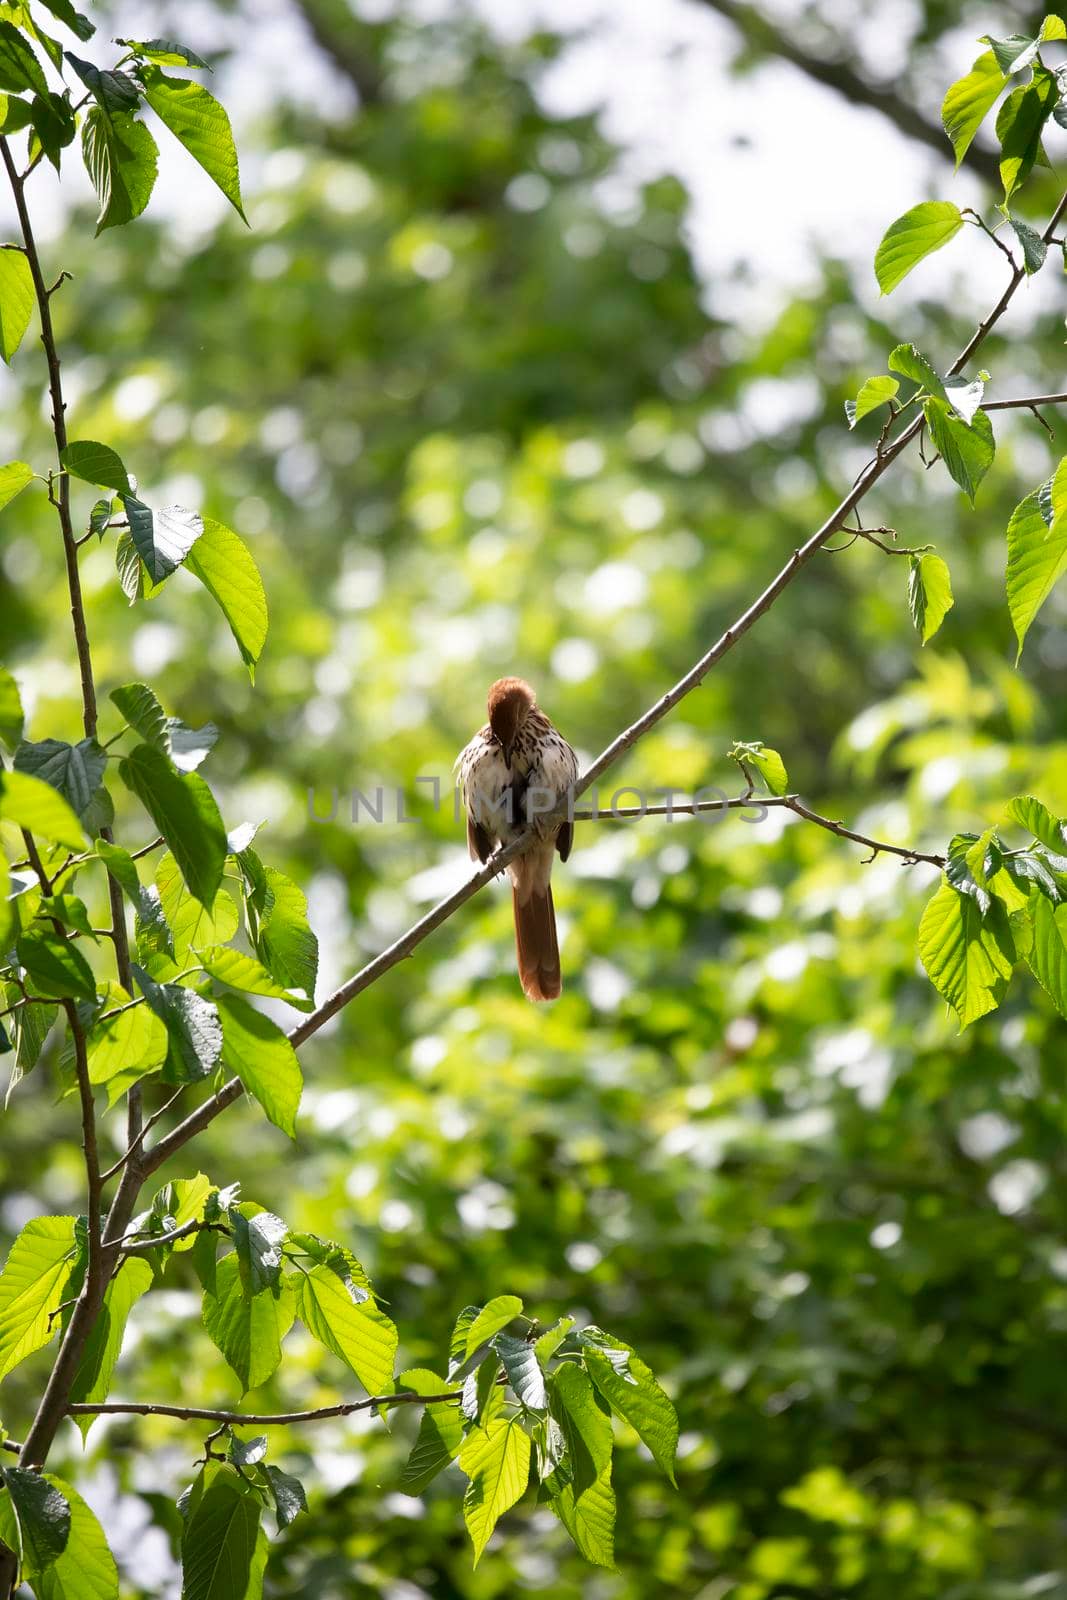 Brown thrasher (Toxostoma rufum) grooming from its perch on a tree branch